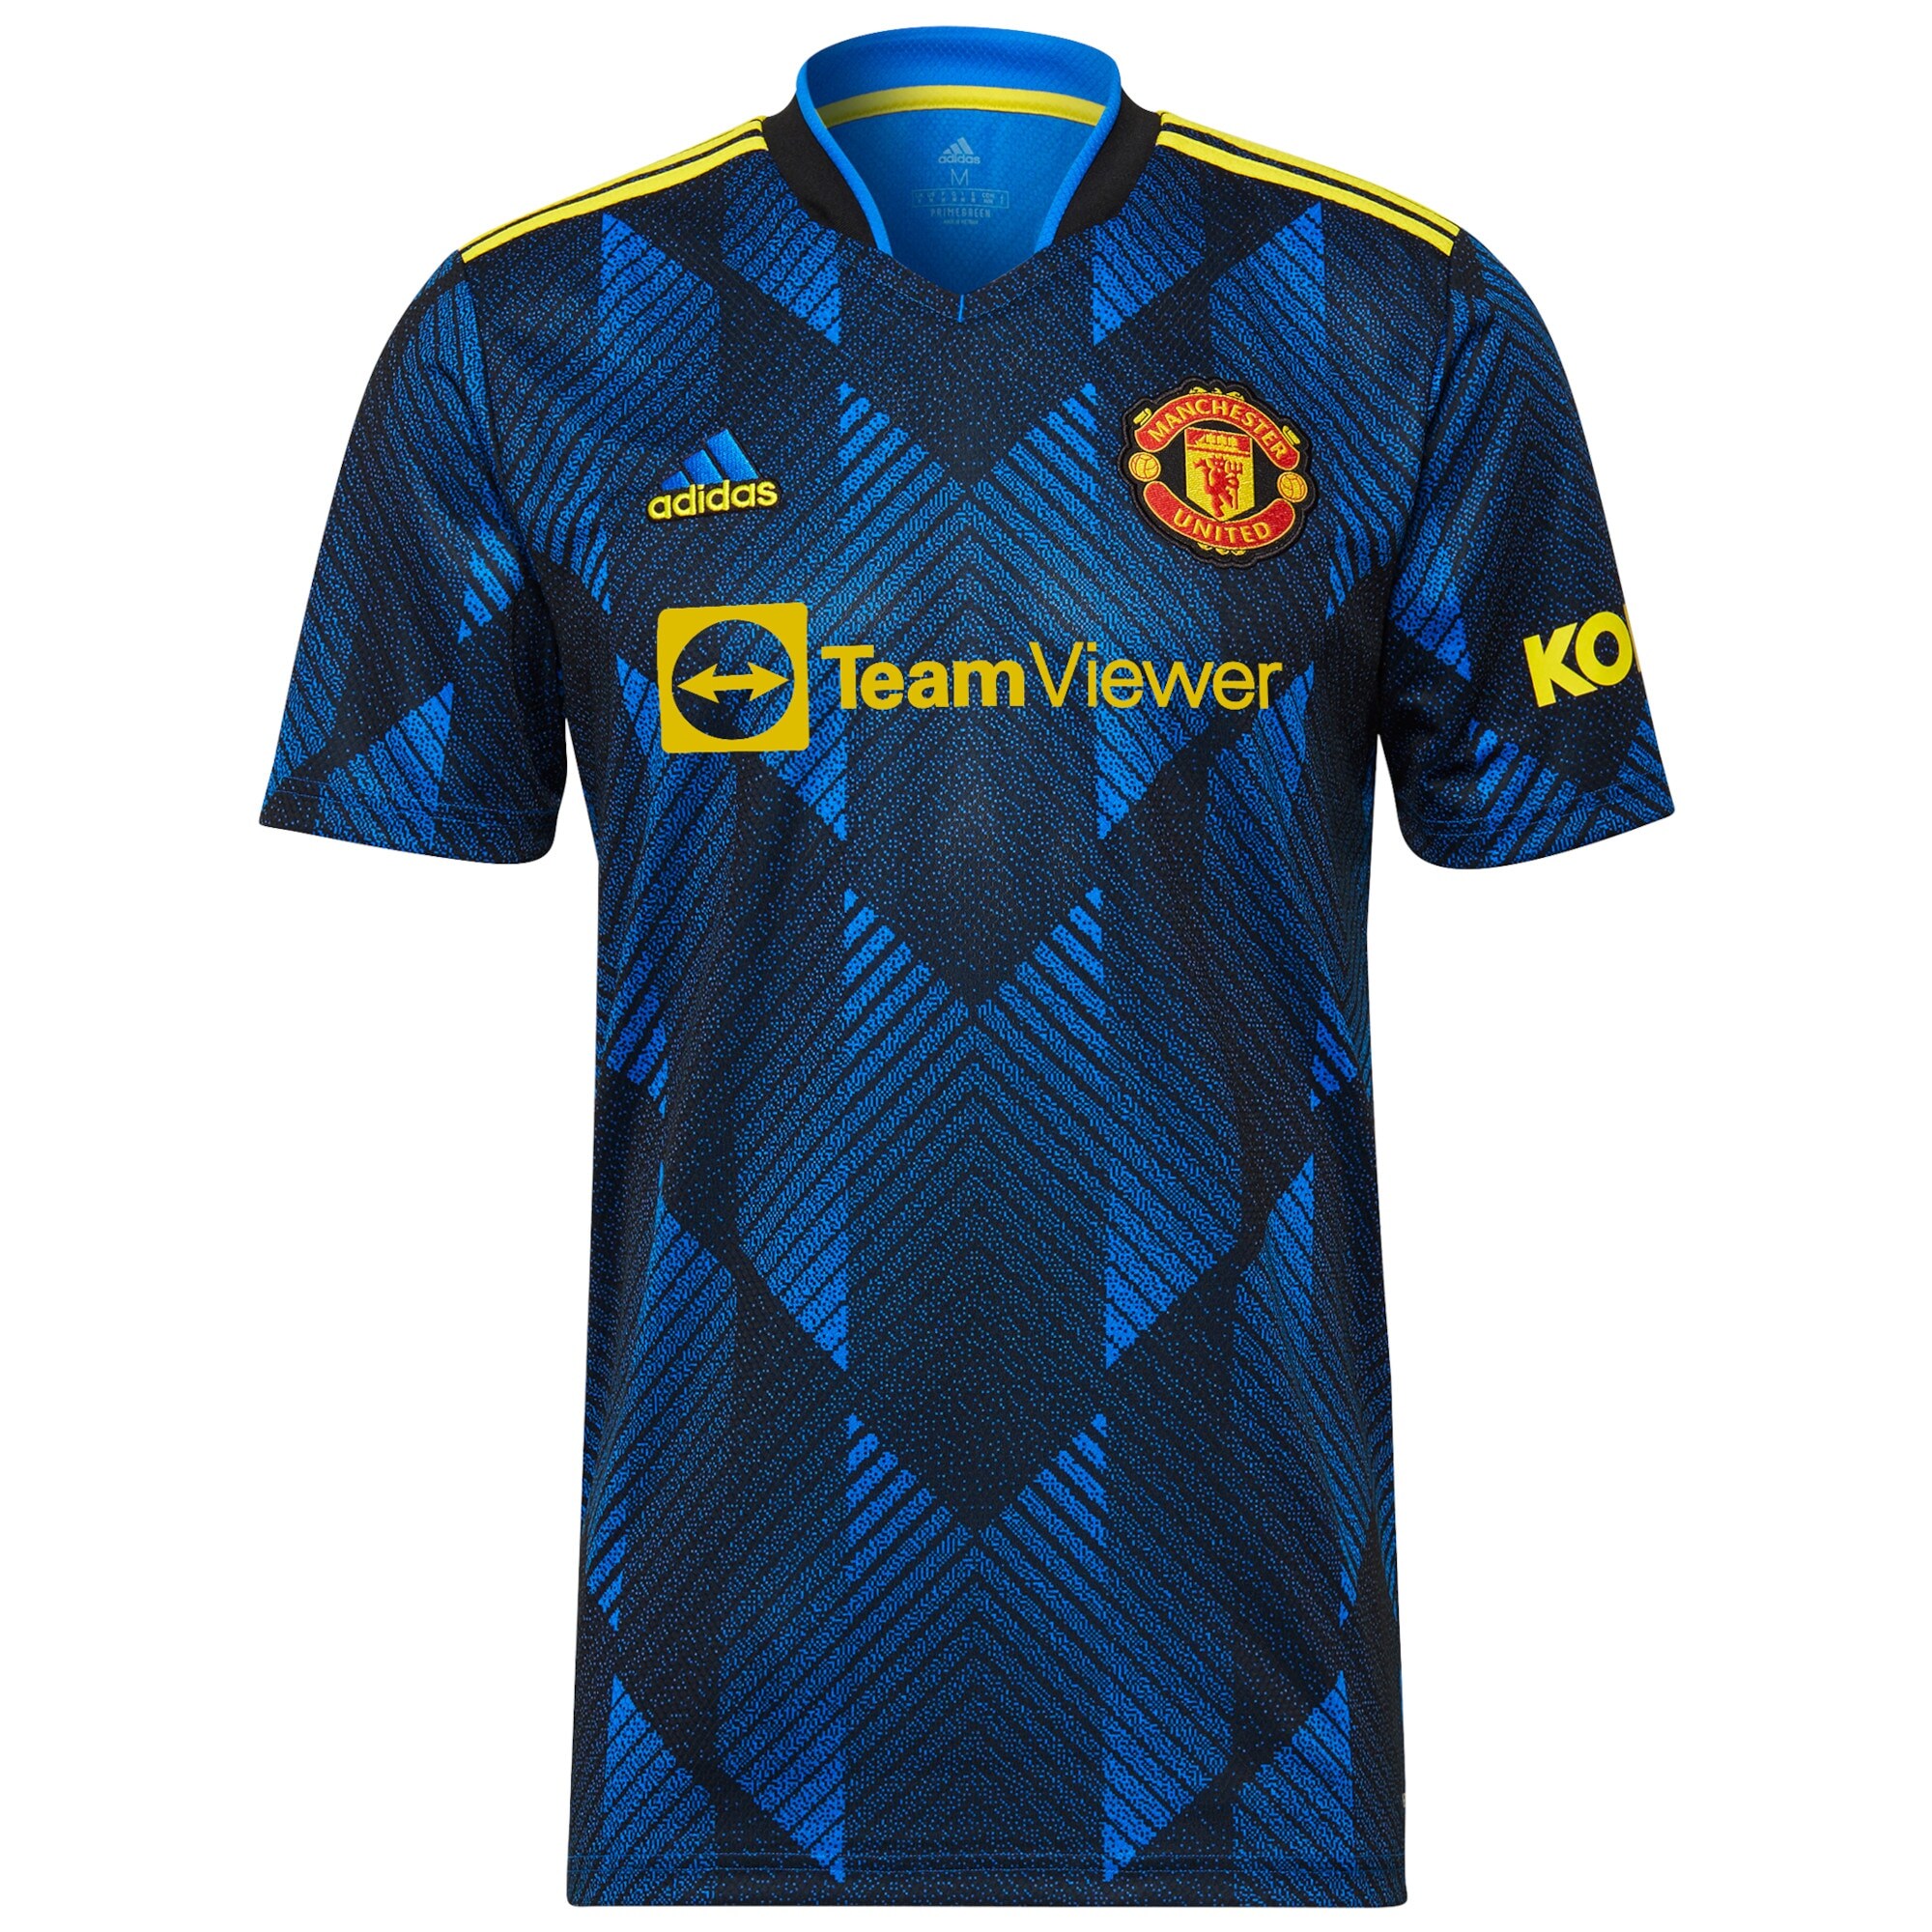 Manchester United Third Shirt 2021-22 with James 21 printing